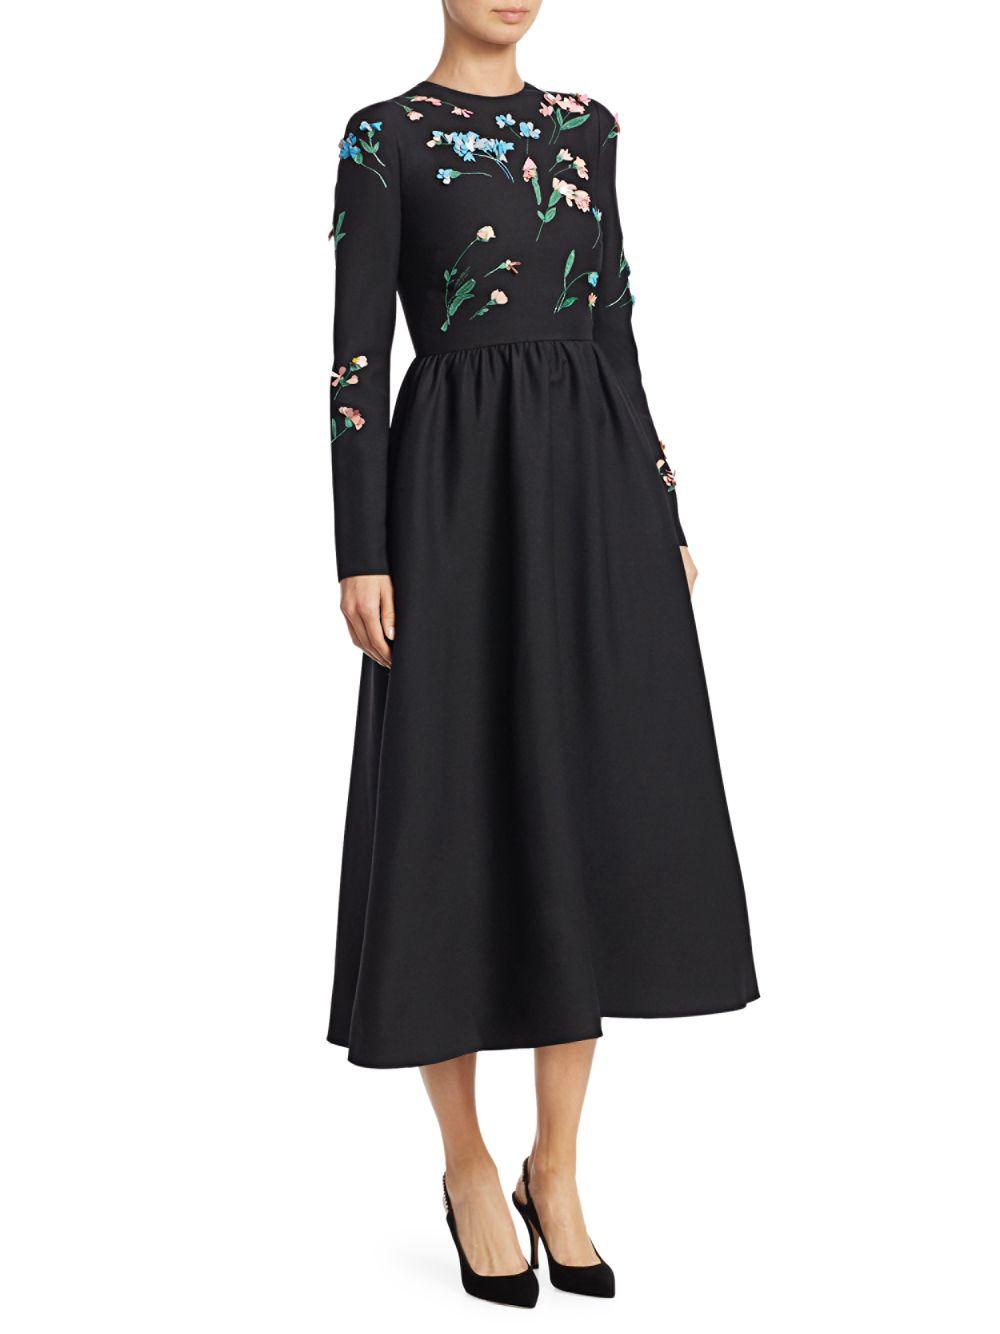 Valentino Embroidered Floral Wool Midi Dress in Black | Lyst